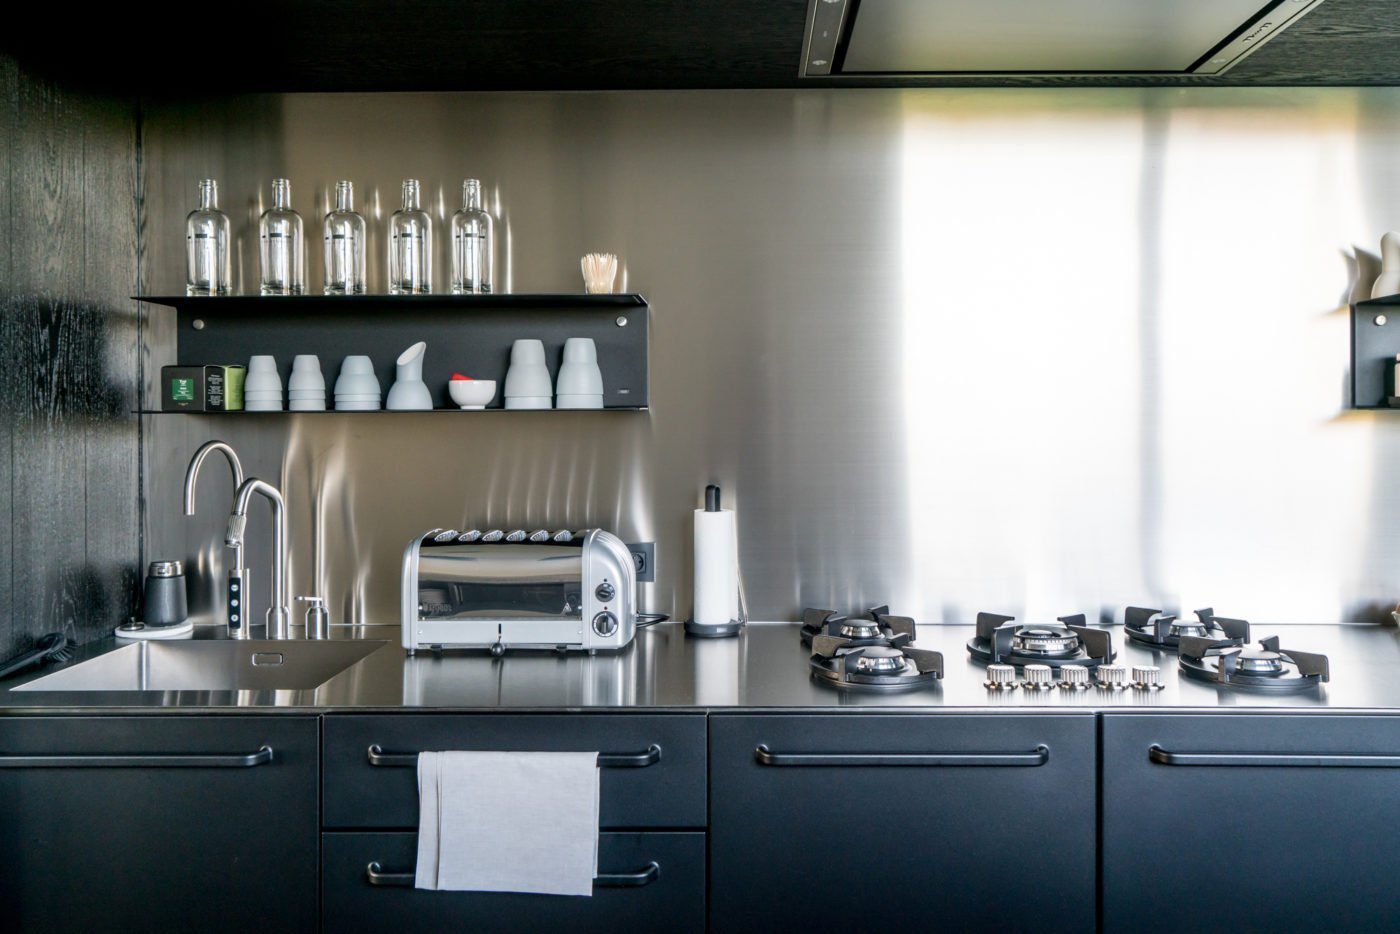 The Bunkers has the first Vipp kitchen in Belgium